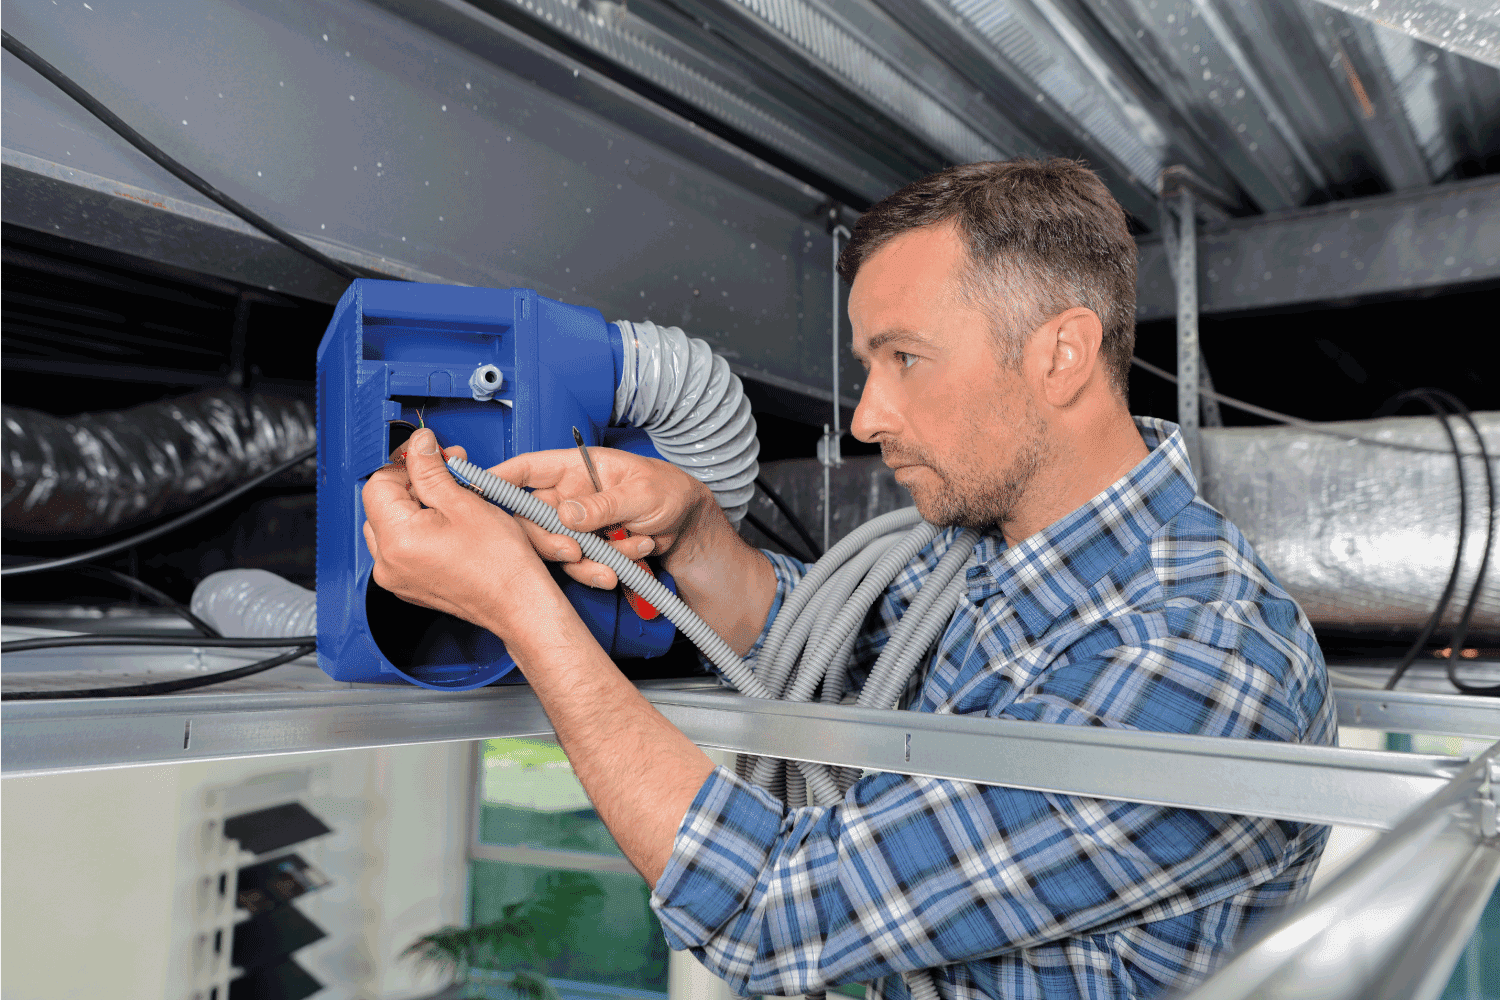 Man repairing ventilation system with bare hands